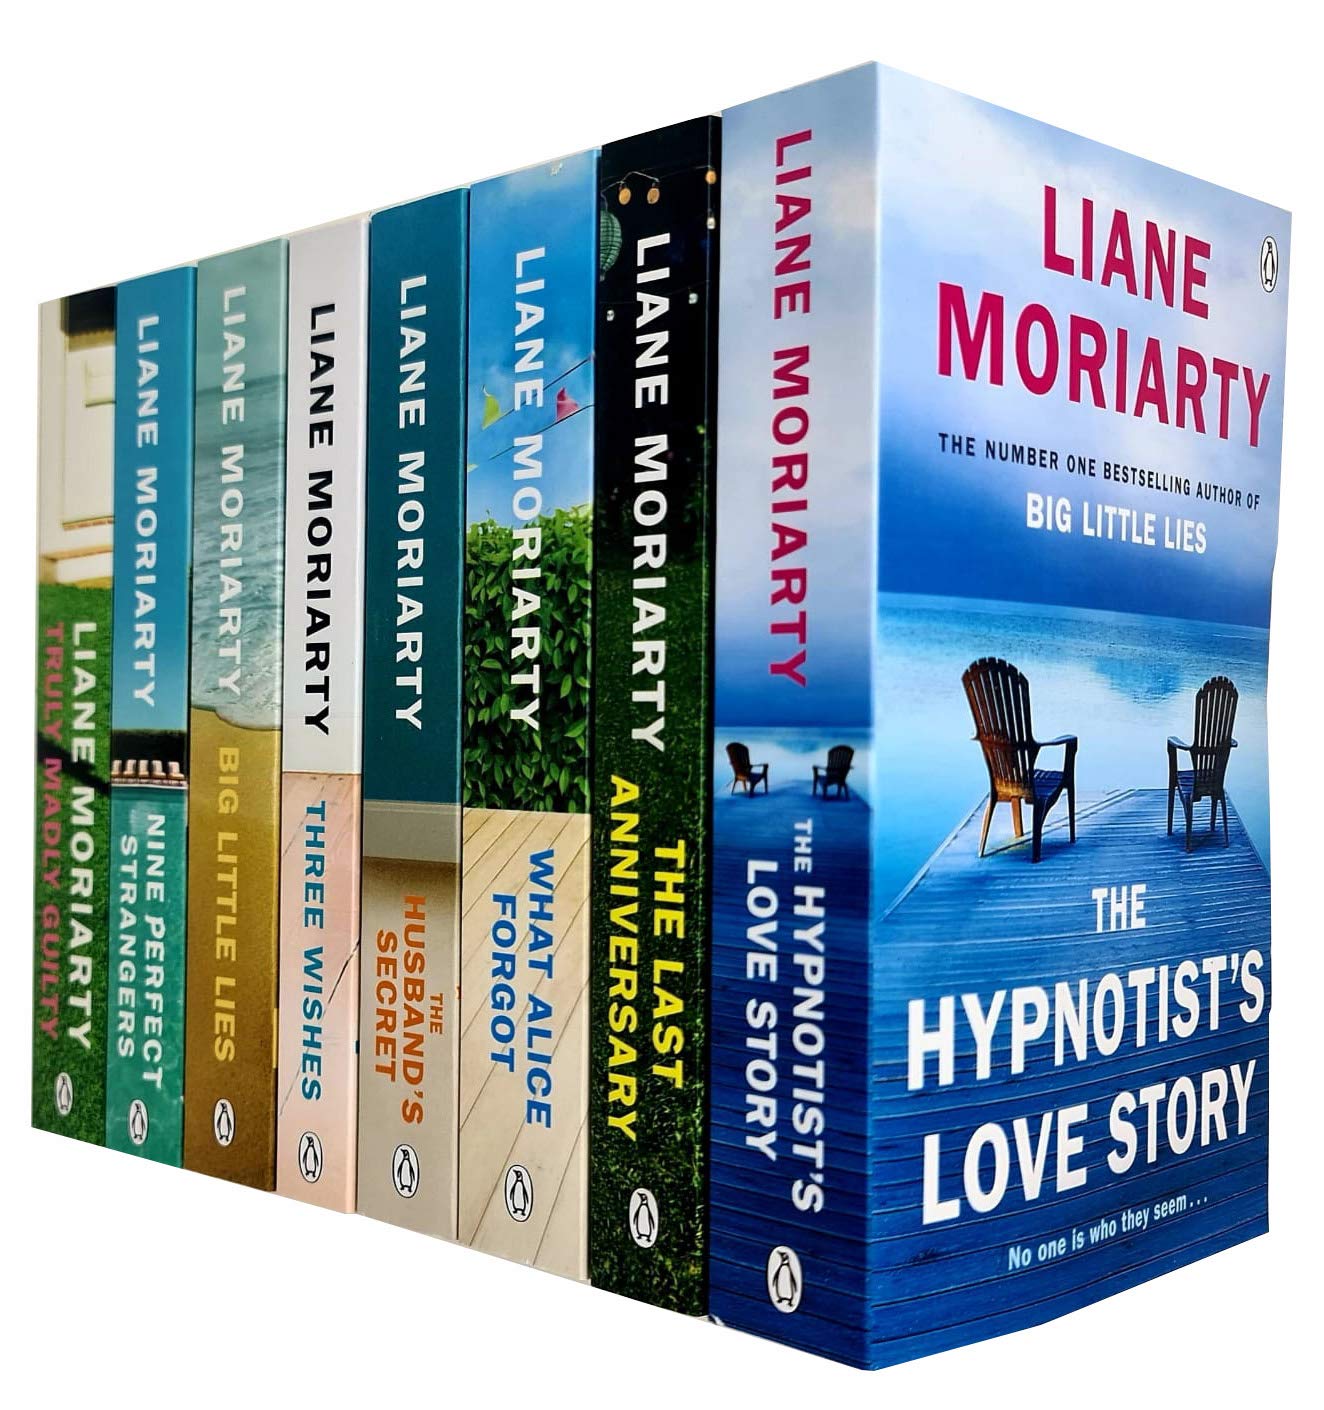 Liane Moriarty Collection 8 Books Set (The Hypnotist's Love Story,The Last Anniversary,What Alice Forgot,The Husband's Secret,Three Wishes,Big Little Lies,Nine Perfect Strangers,Truly Madly Guilty): Amazon.co.uk: Liane Moriarty, The Hypnotist's Love ...